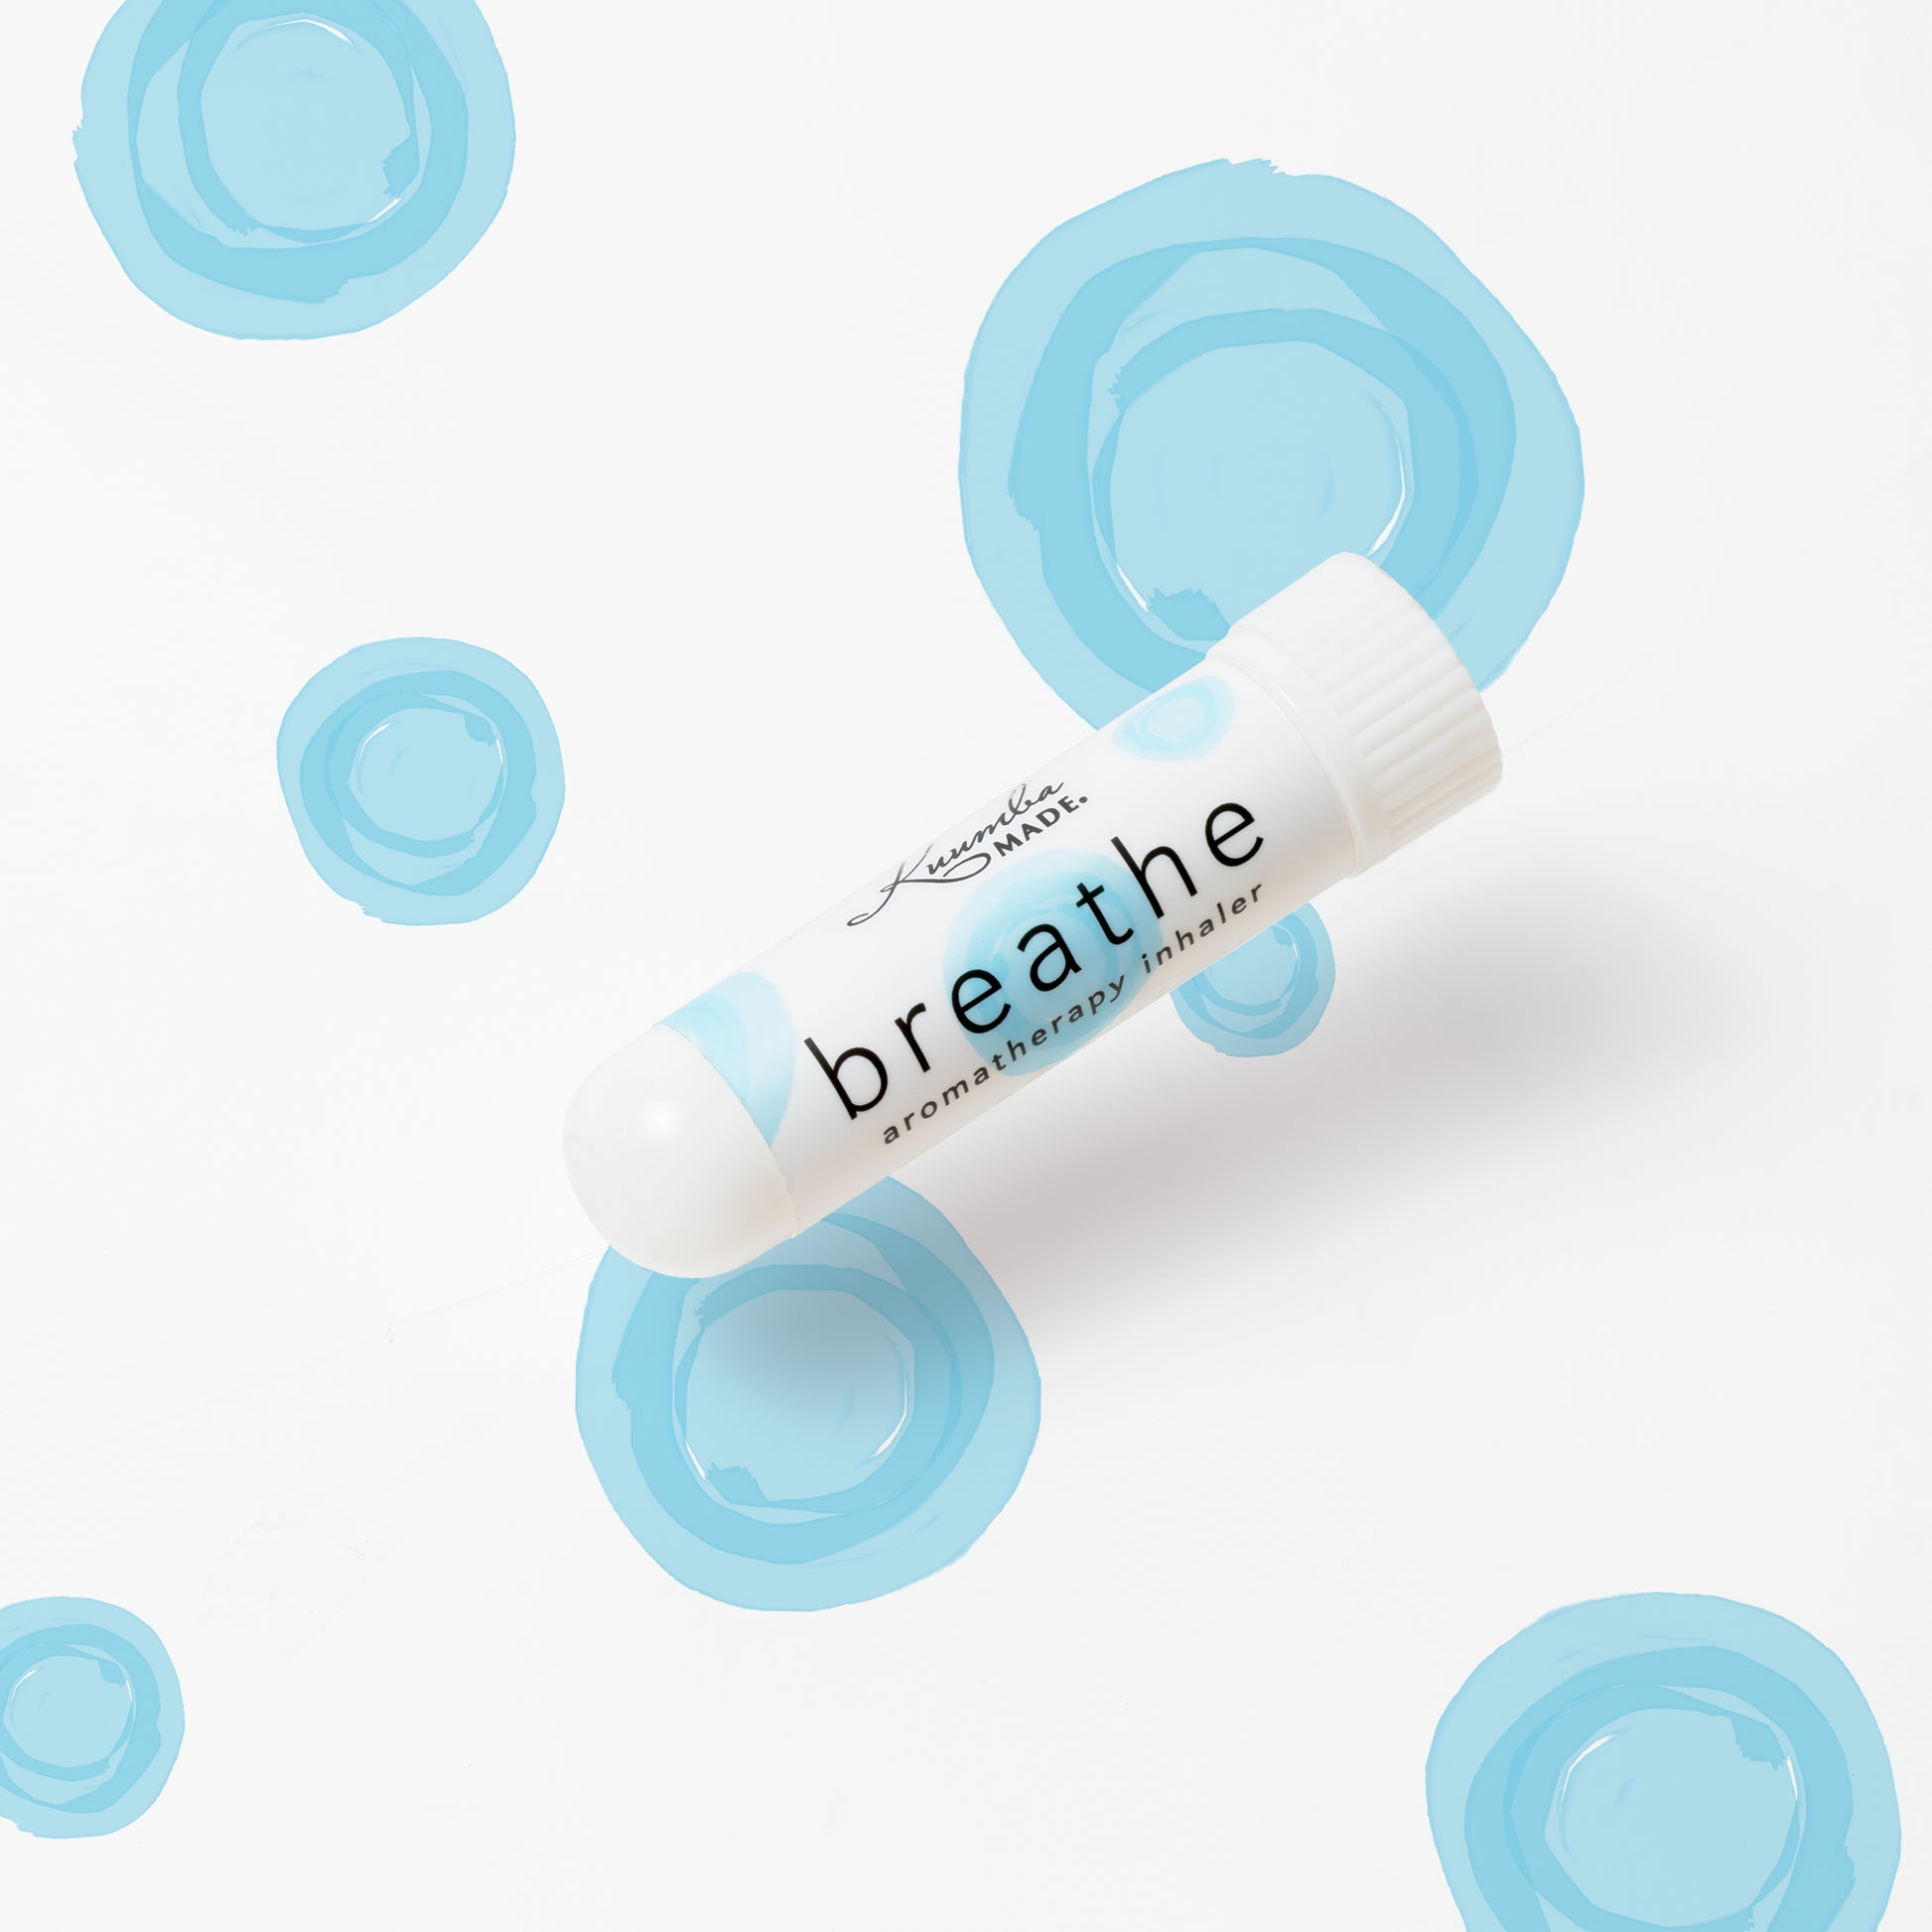 Breathe Personal Aromatherapy Inhaler from Kuumba Made with blue dots in the background